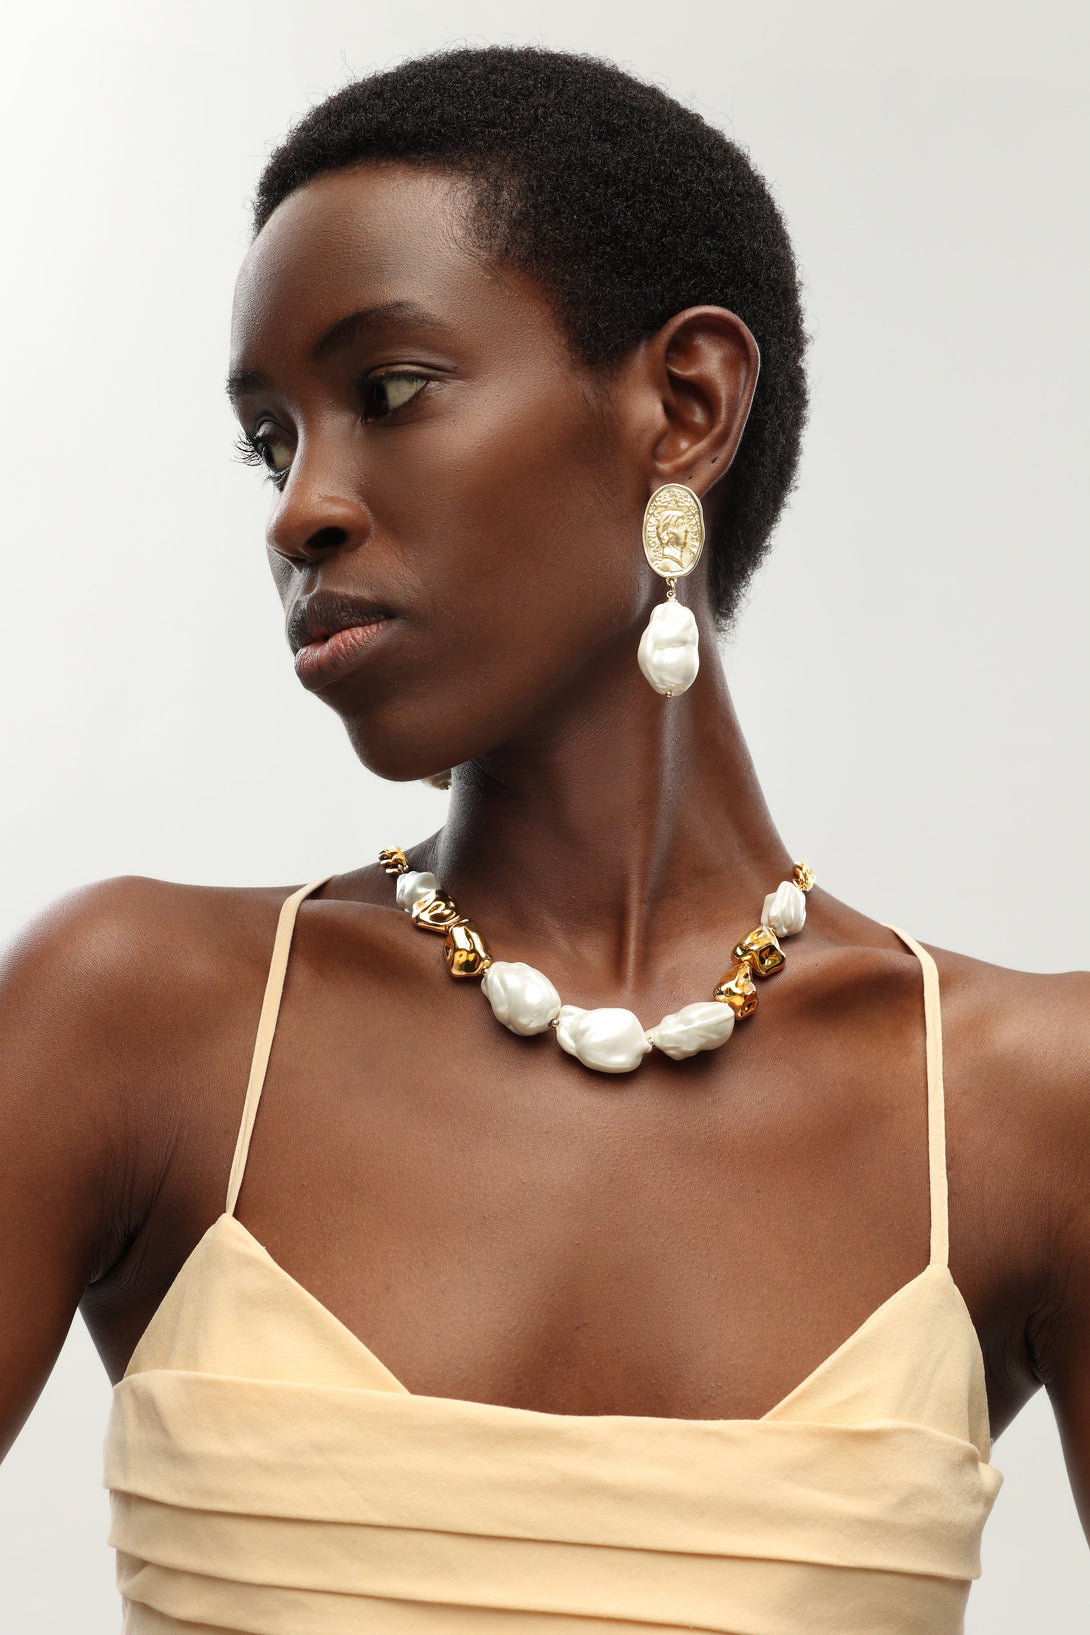 Matted Gold Sculpted Oversized Baroque Pearl Drop Earrings - Classicharms